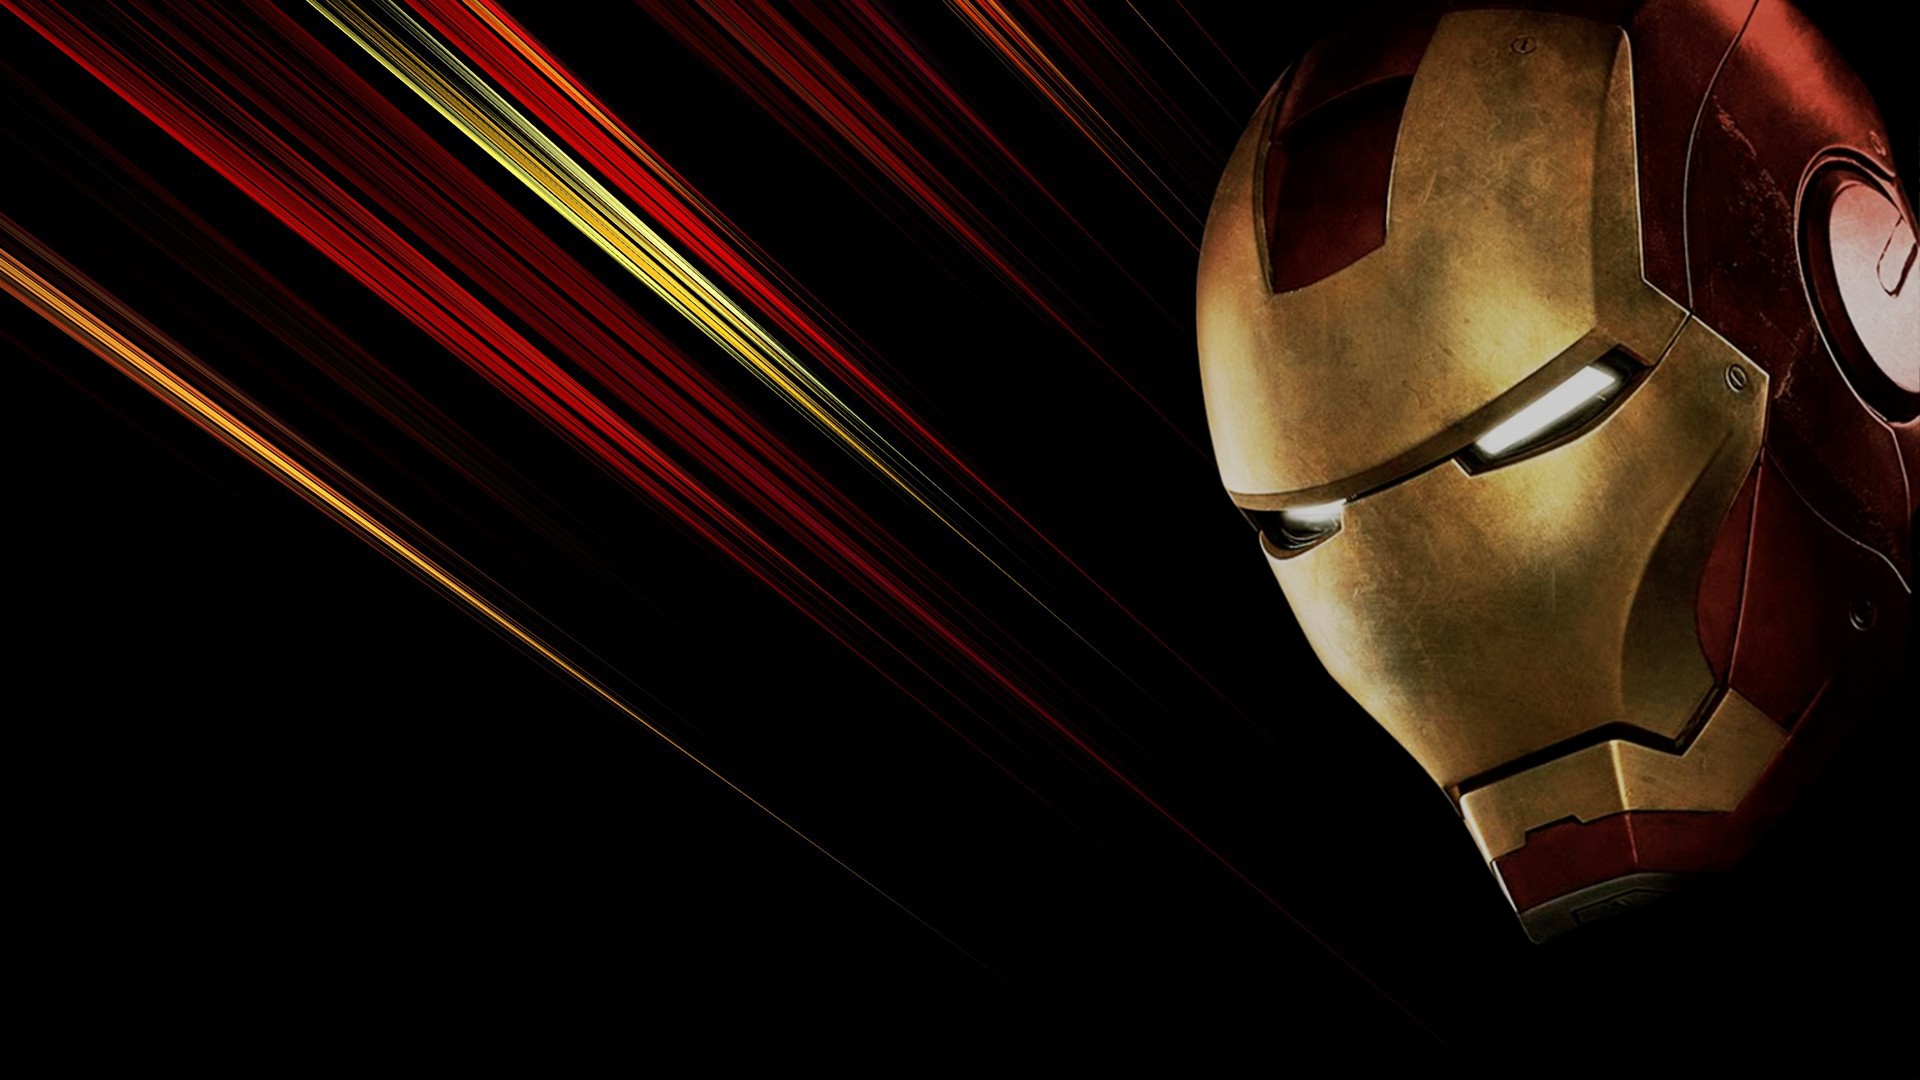  Iron Man Tablet Wallpapers